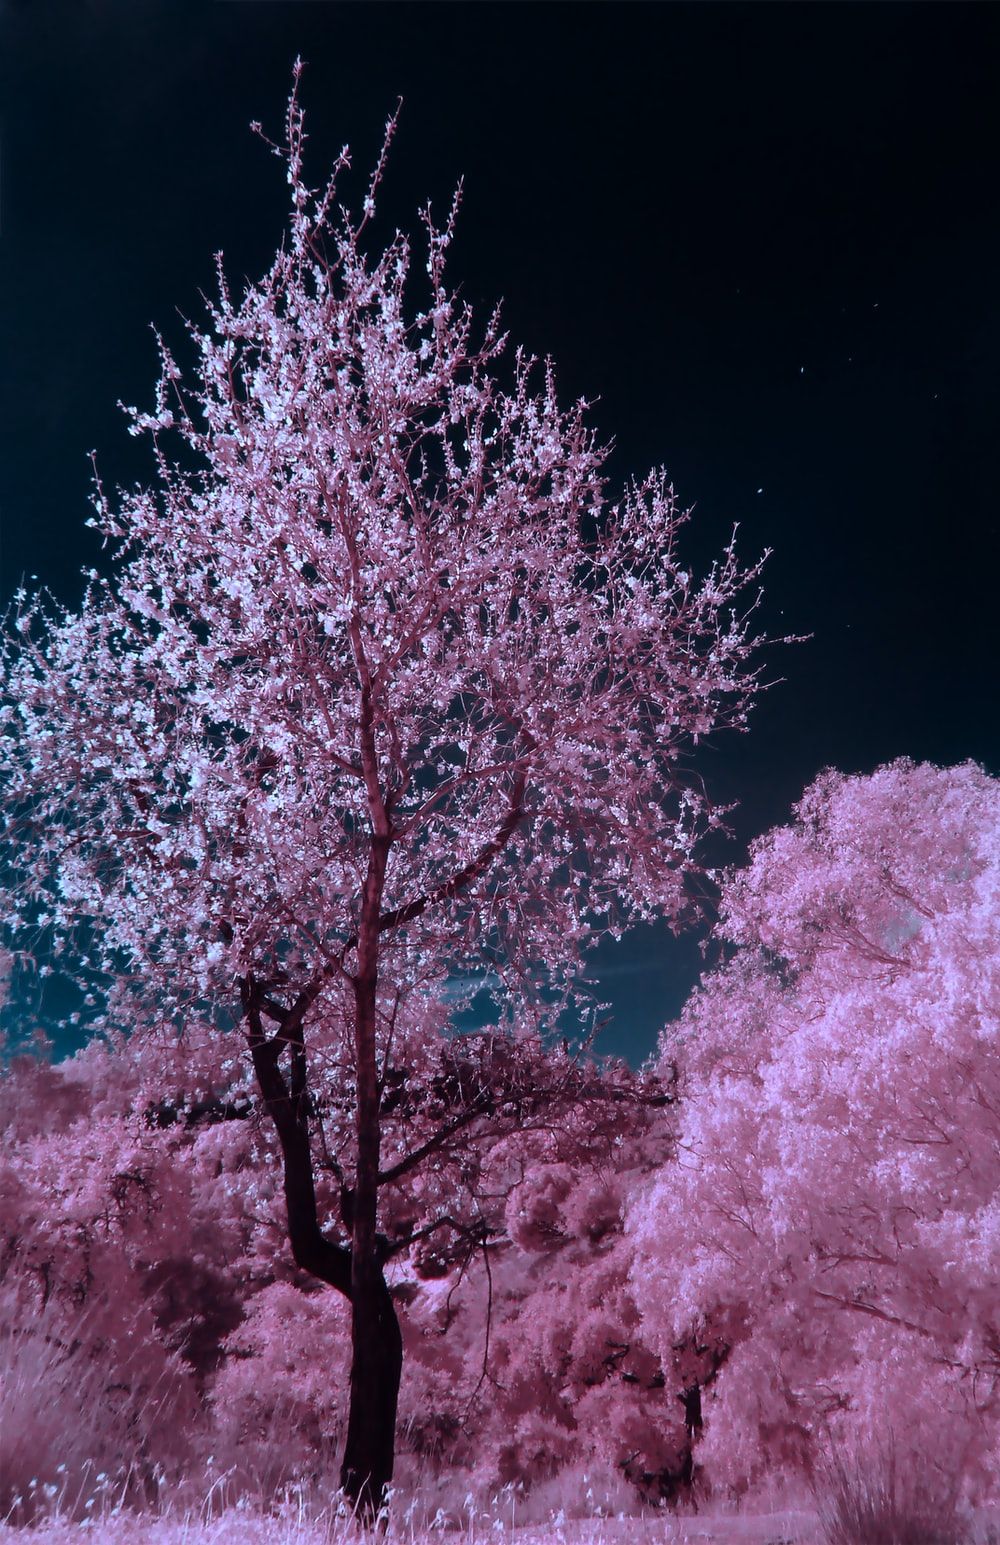 Aesthetic Cherry Blossom Landscape Wallpapers - Wallpaper Cave